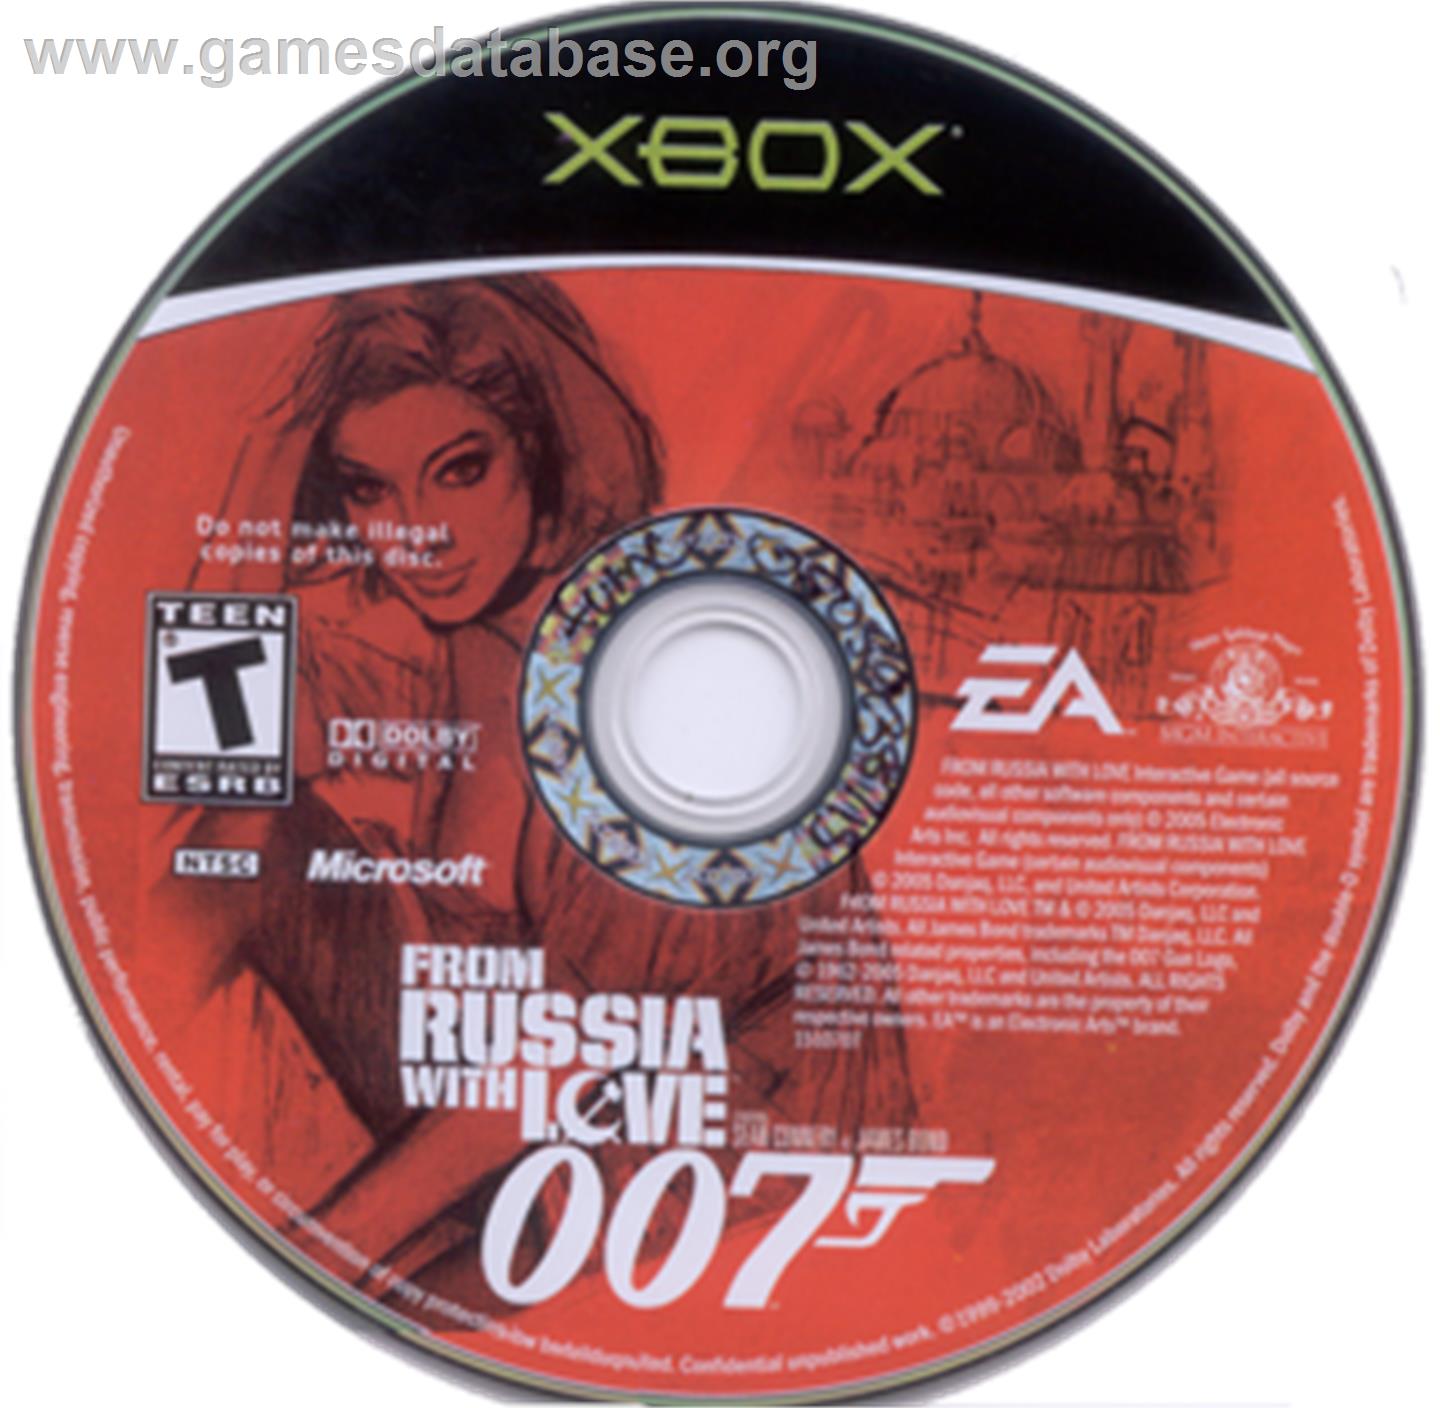 007: From Russia with Love - Microsoft Xbox - Artwork - CD